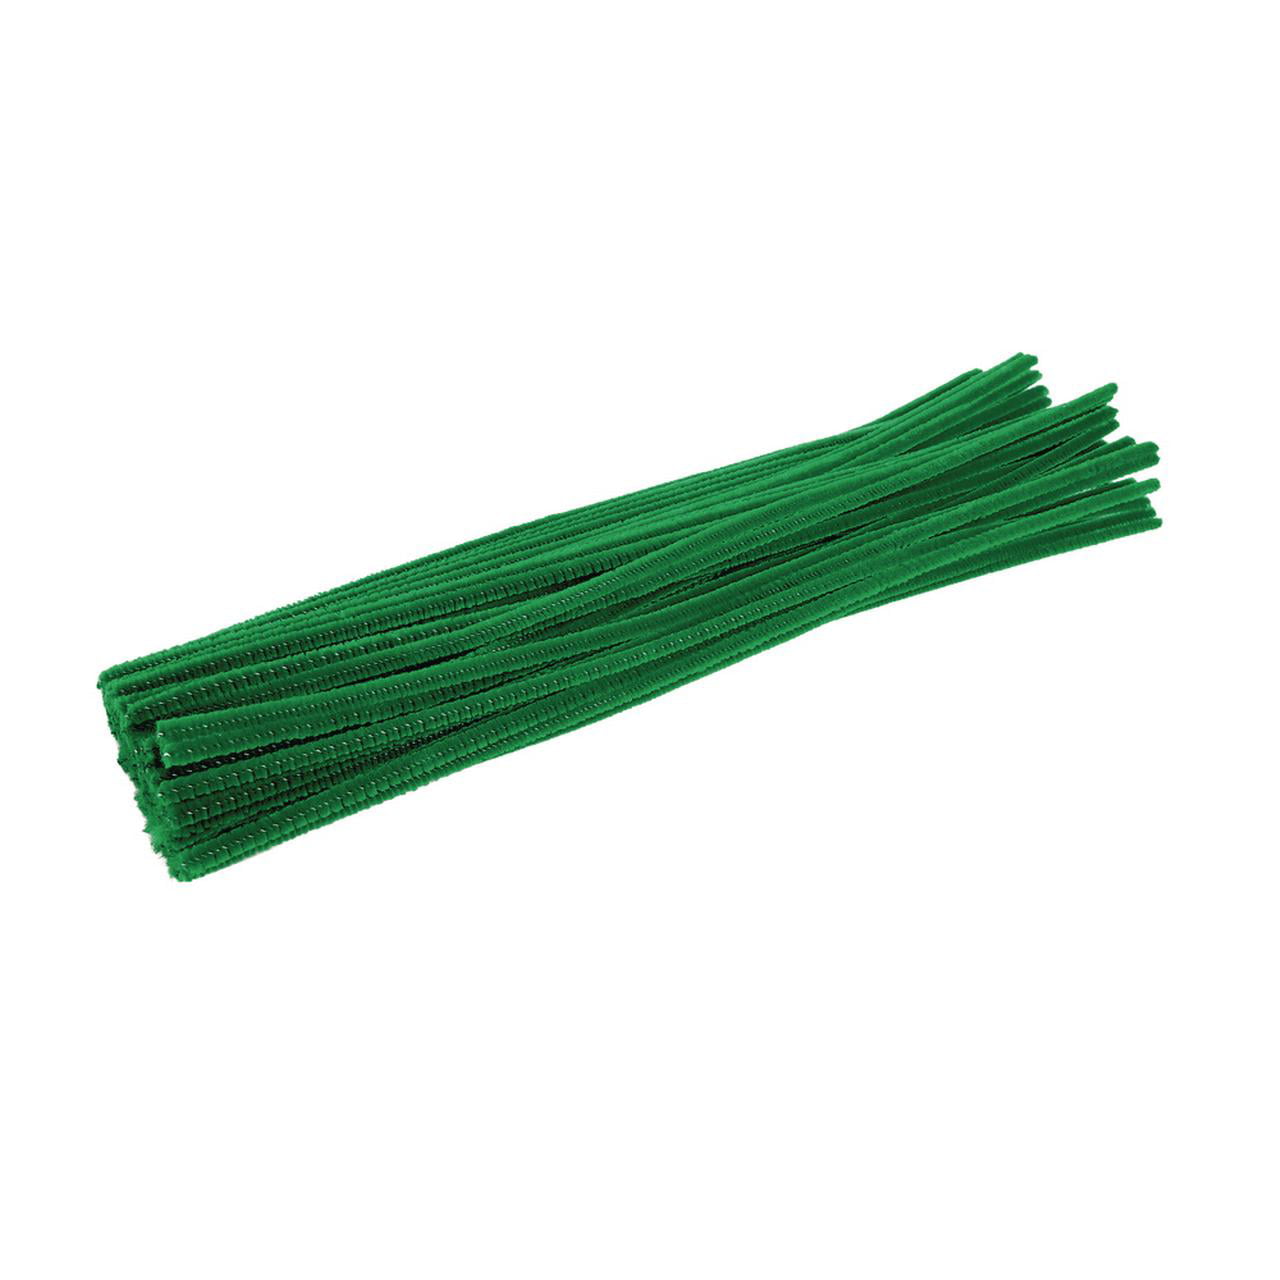 10-1,000 x BRIGHT GREEN chenille craft stems pipe cleaners 30cm long,6mm wide 